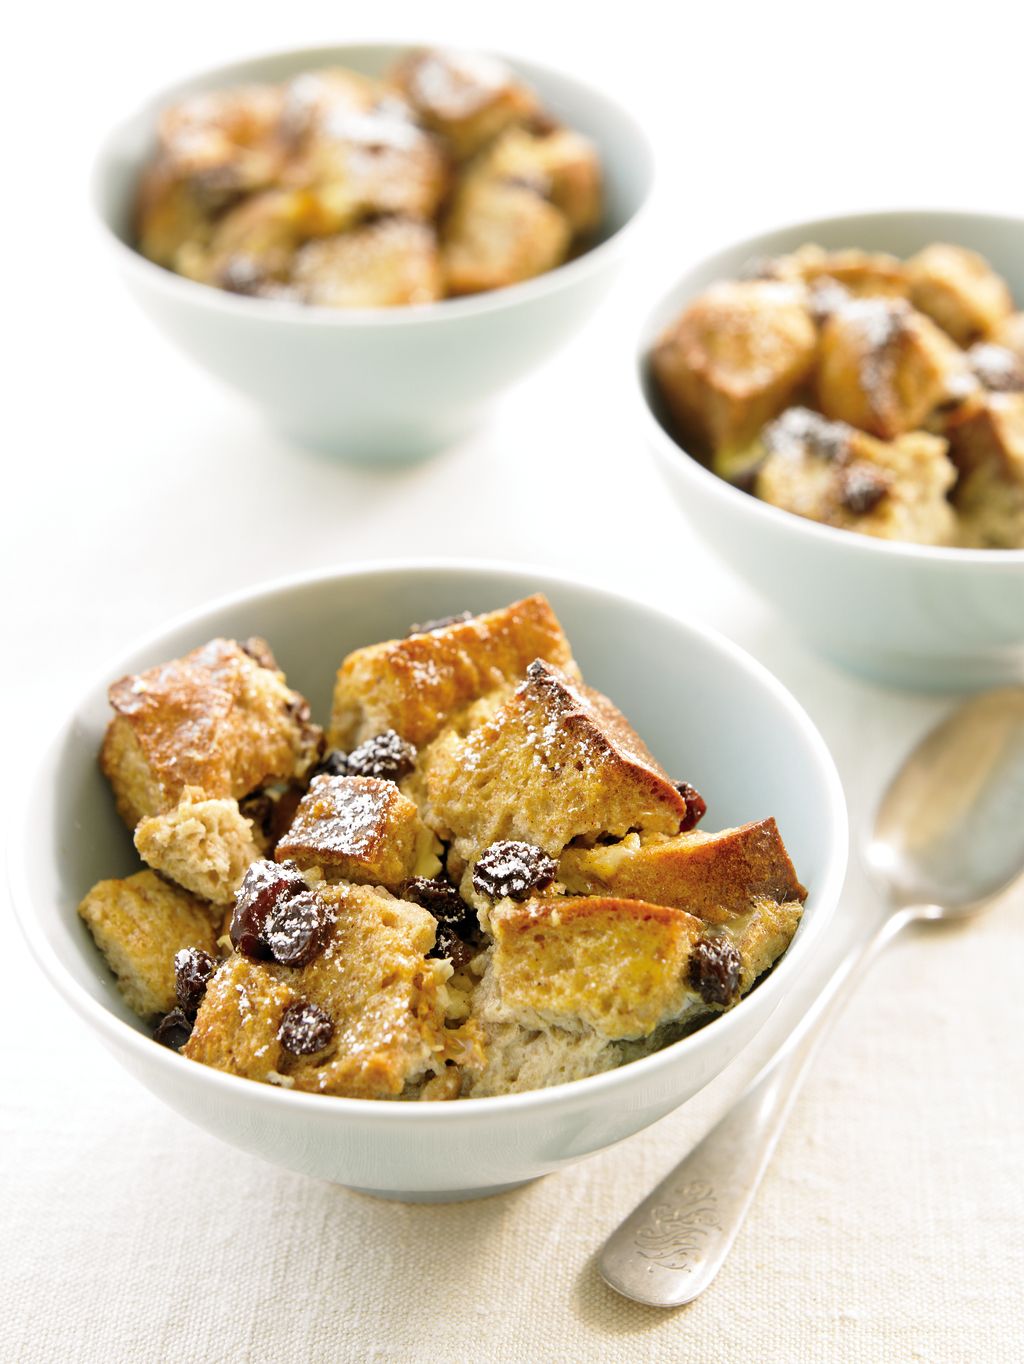 Coconut Bread Pudding - Salty Ginger